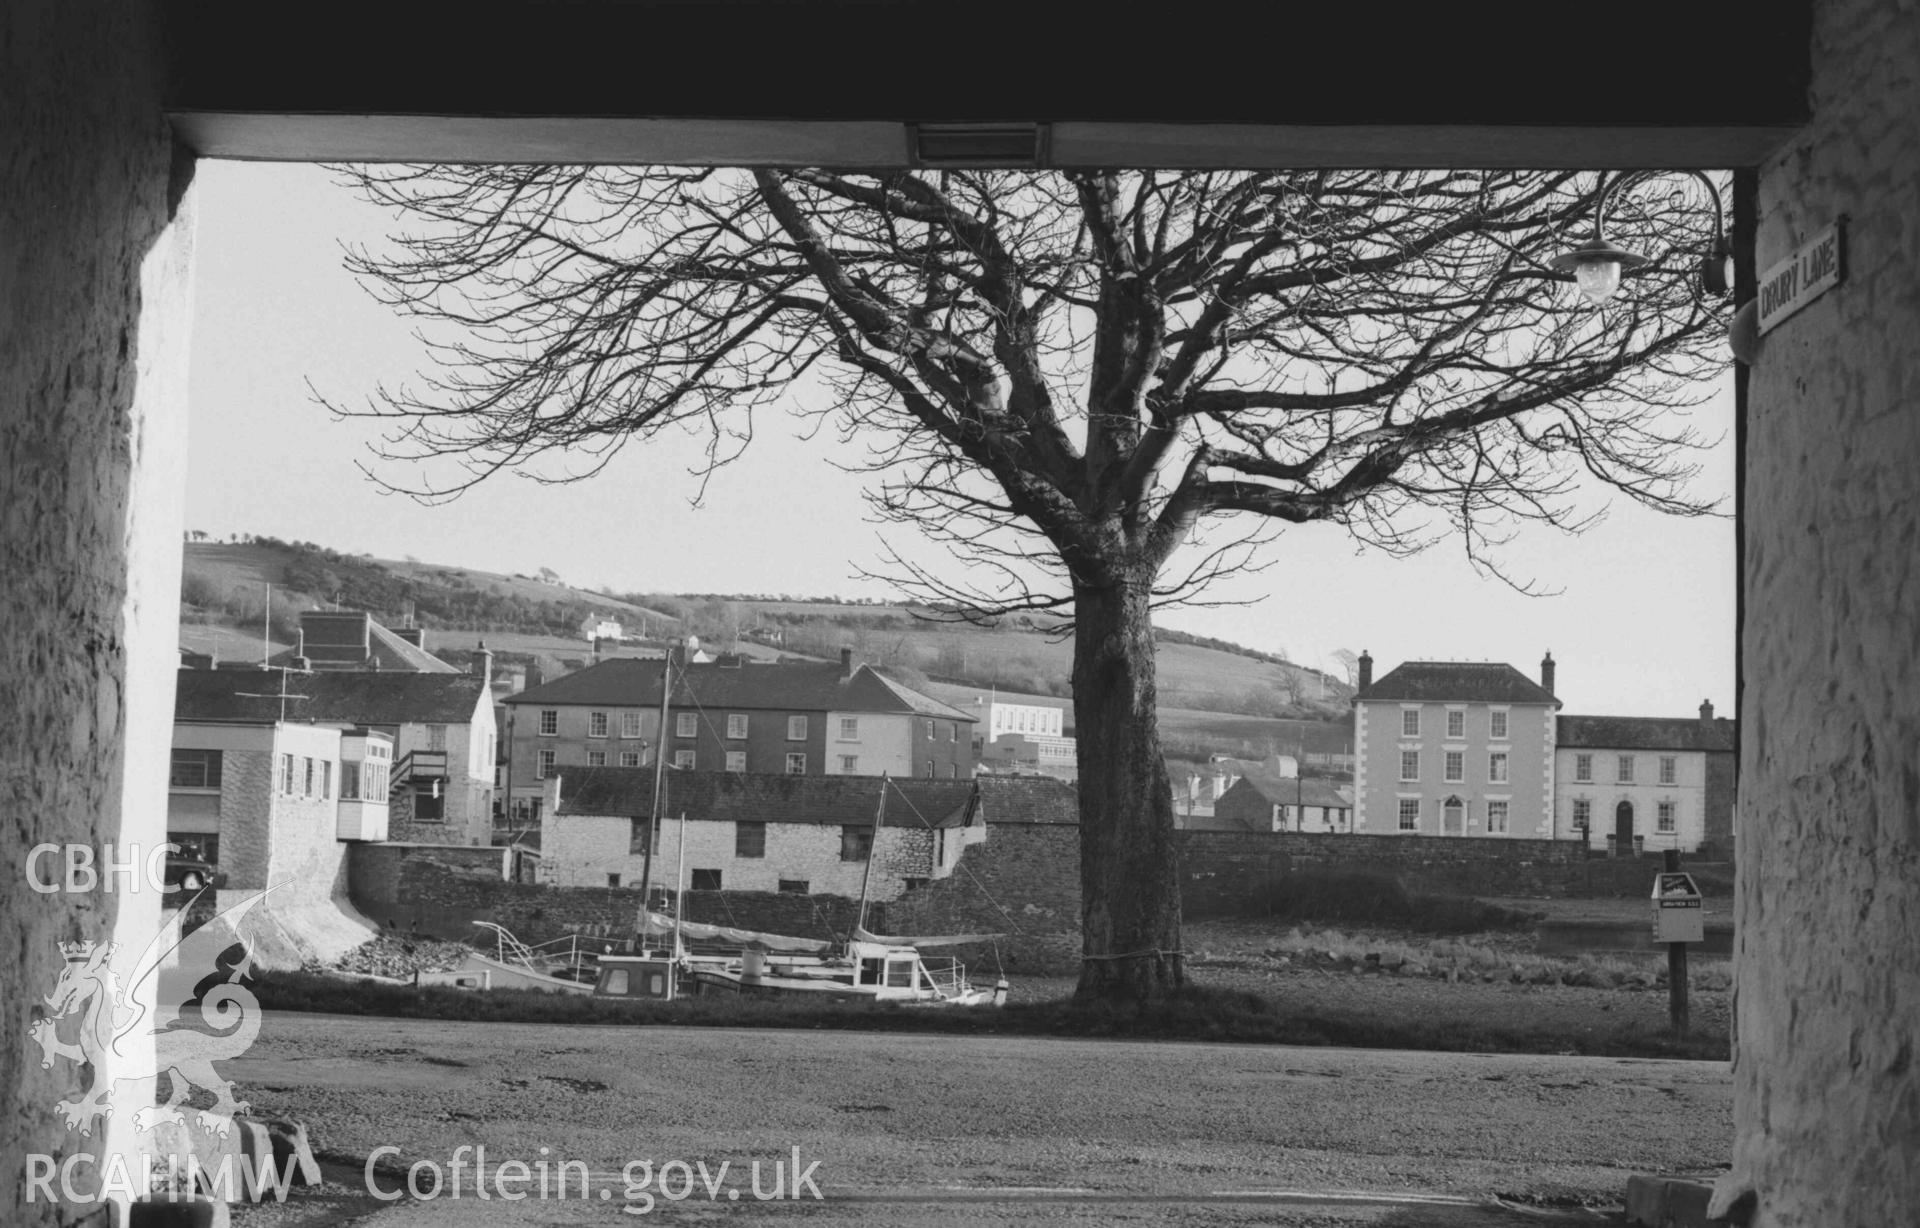 Digital copy of a black and white negative showing view from Drury Lane across Aberaeron harbour. Photographed by Arthur Chater on 28 December 1968. Looking south east from Grid Reference SN 4568 6294.